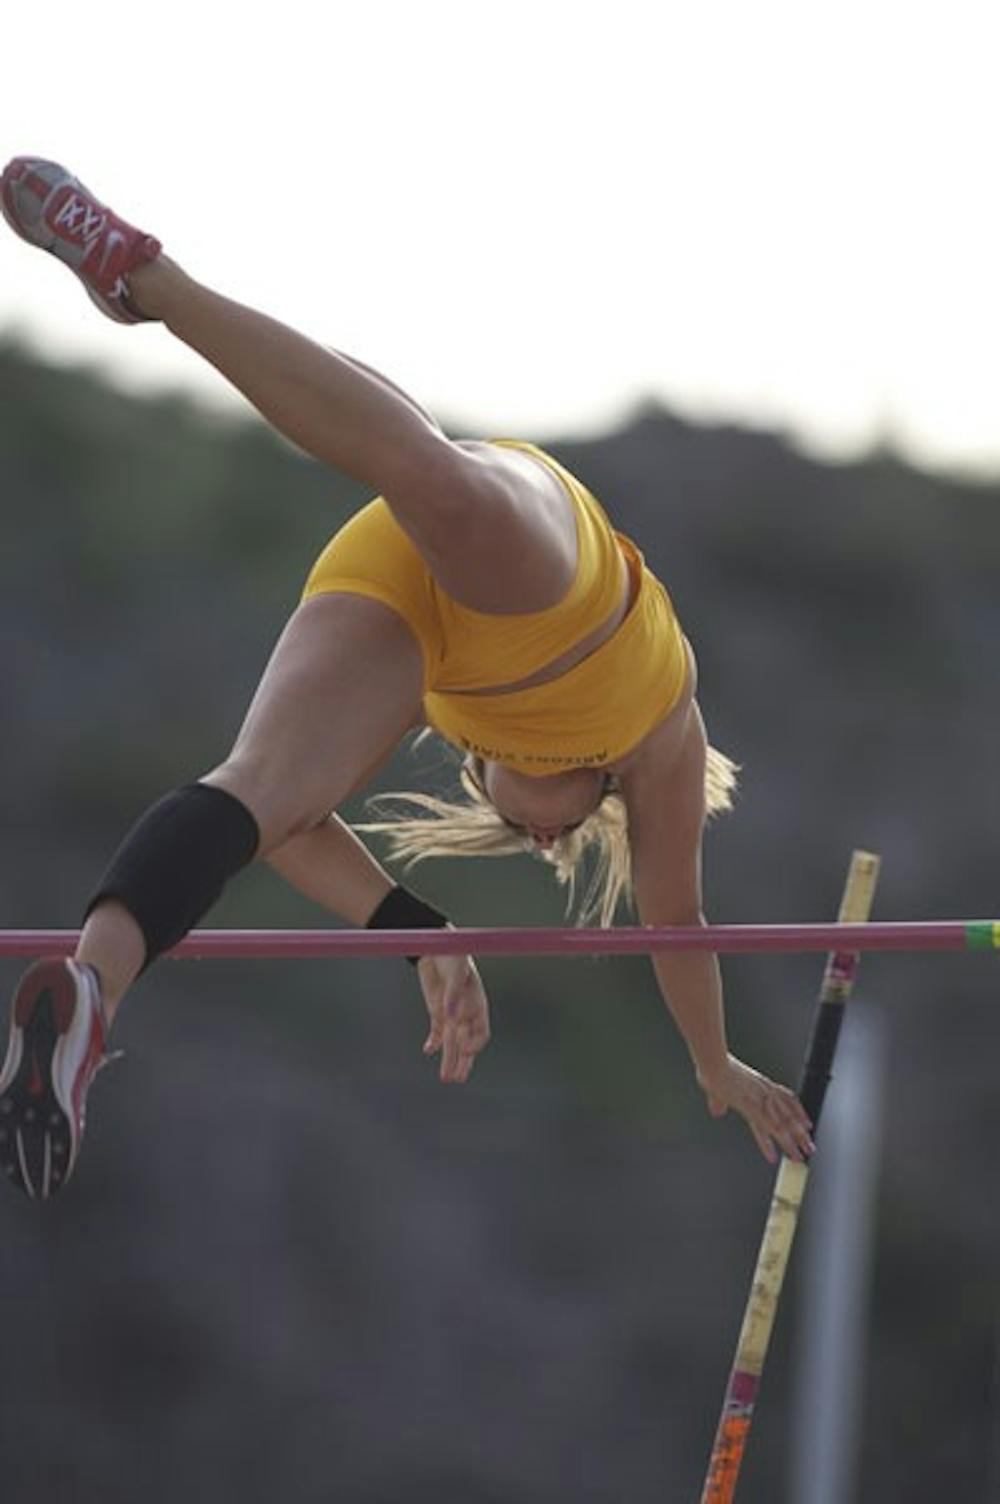 OVER THE WALL: Sophomore pole vaulter Cara Carpenter makes it over the pole during the Baldy Castillo Invitational in March. Carpenter was one of many Sun Devils that starred at the Sun Devil Open, winning the pole vault by reaching 3.77 meters (12-04.50 feet). (Photo by Scott Stuk)